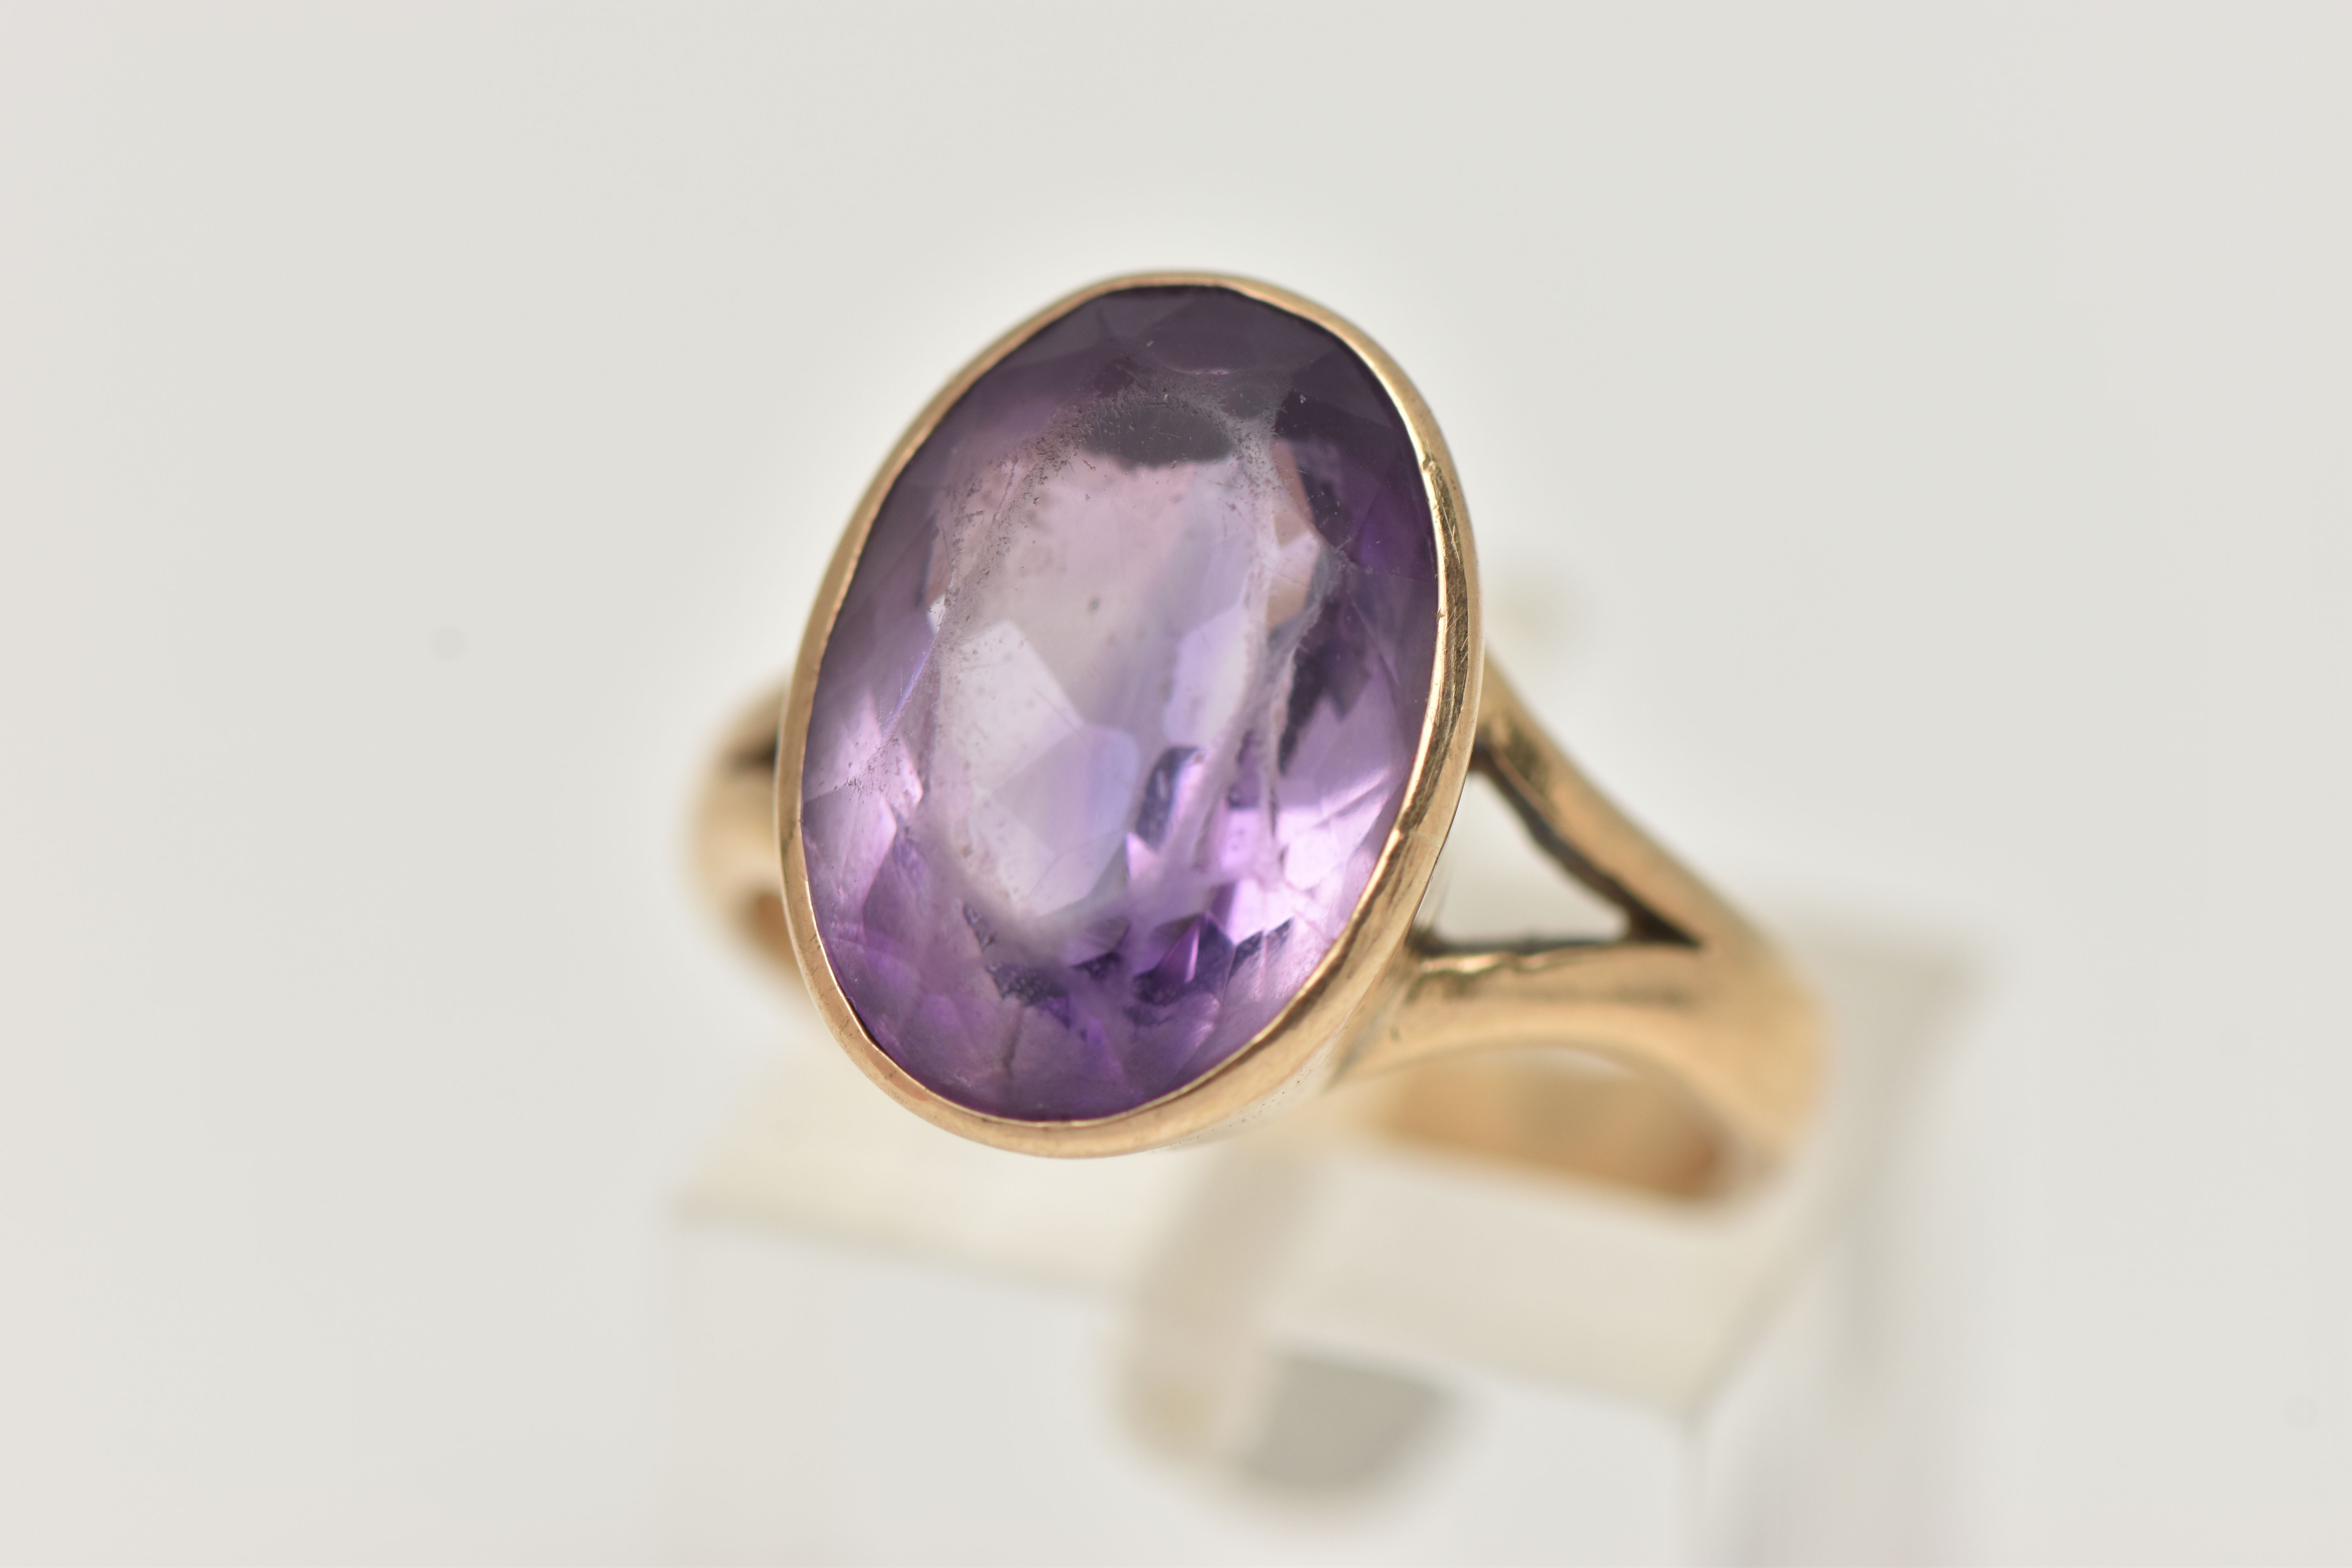 A YELLOW METAL AMETHYST RING, large oval cut amethyst, measuring approximately length 15.2mm x width